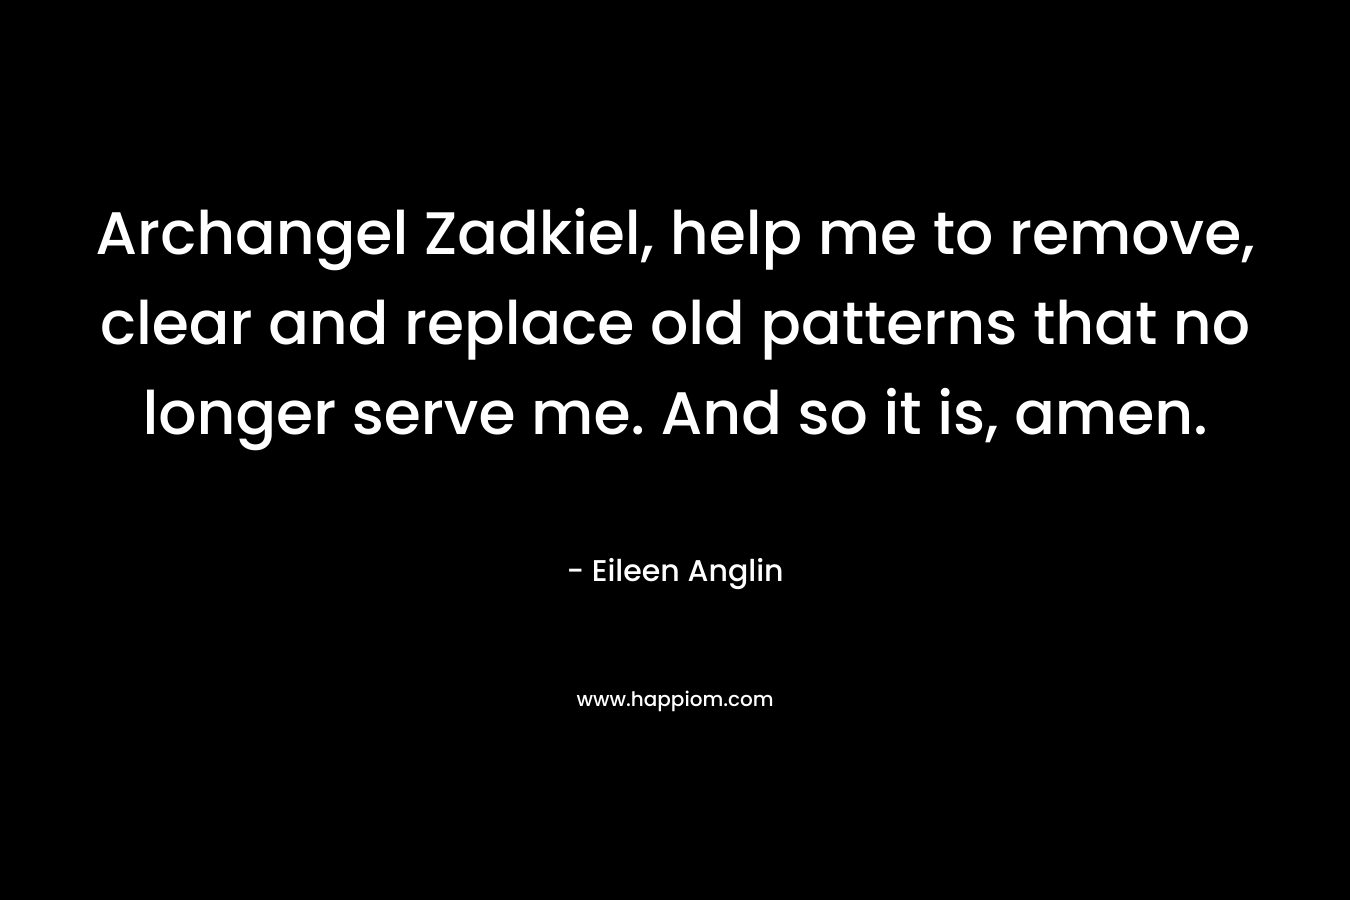 Archangel Zadkiel, help me to remove, clear and replace old patterns that no longer serve me. And so it is, amen. – Eileen Anglin